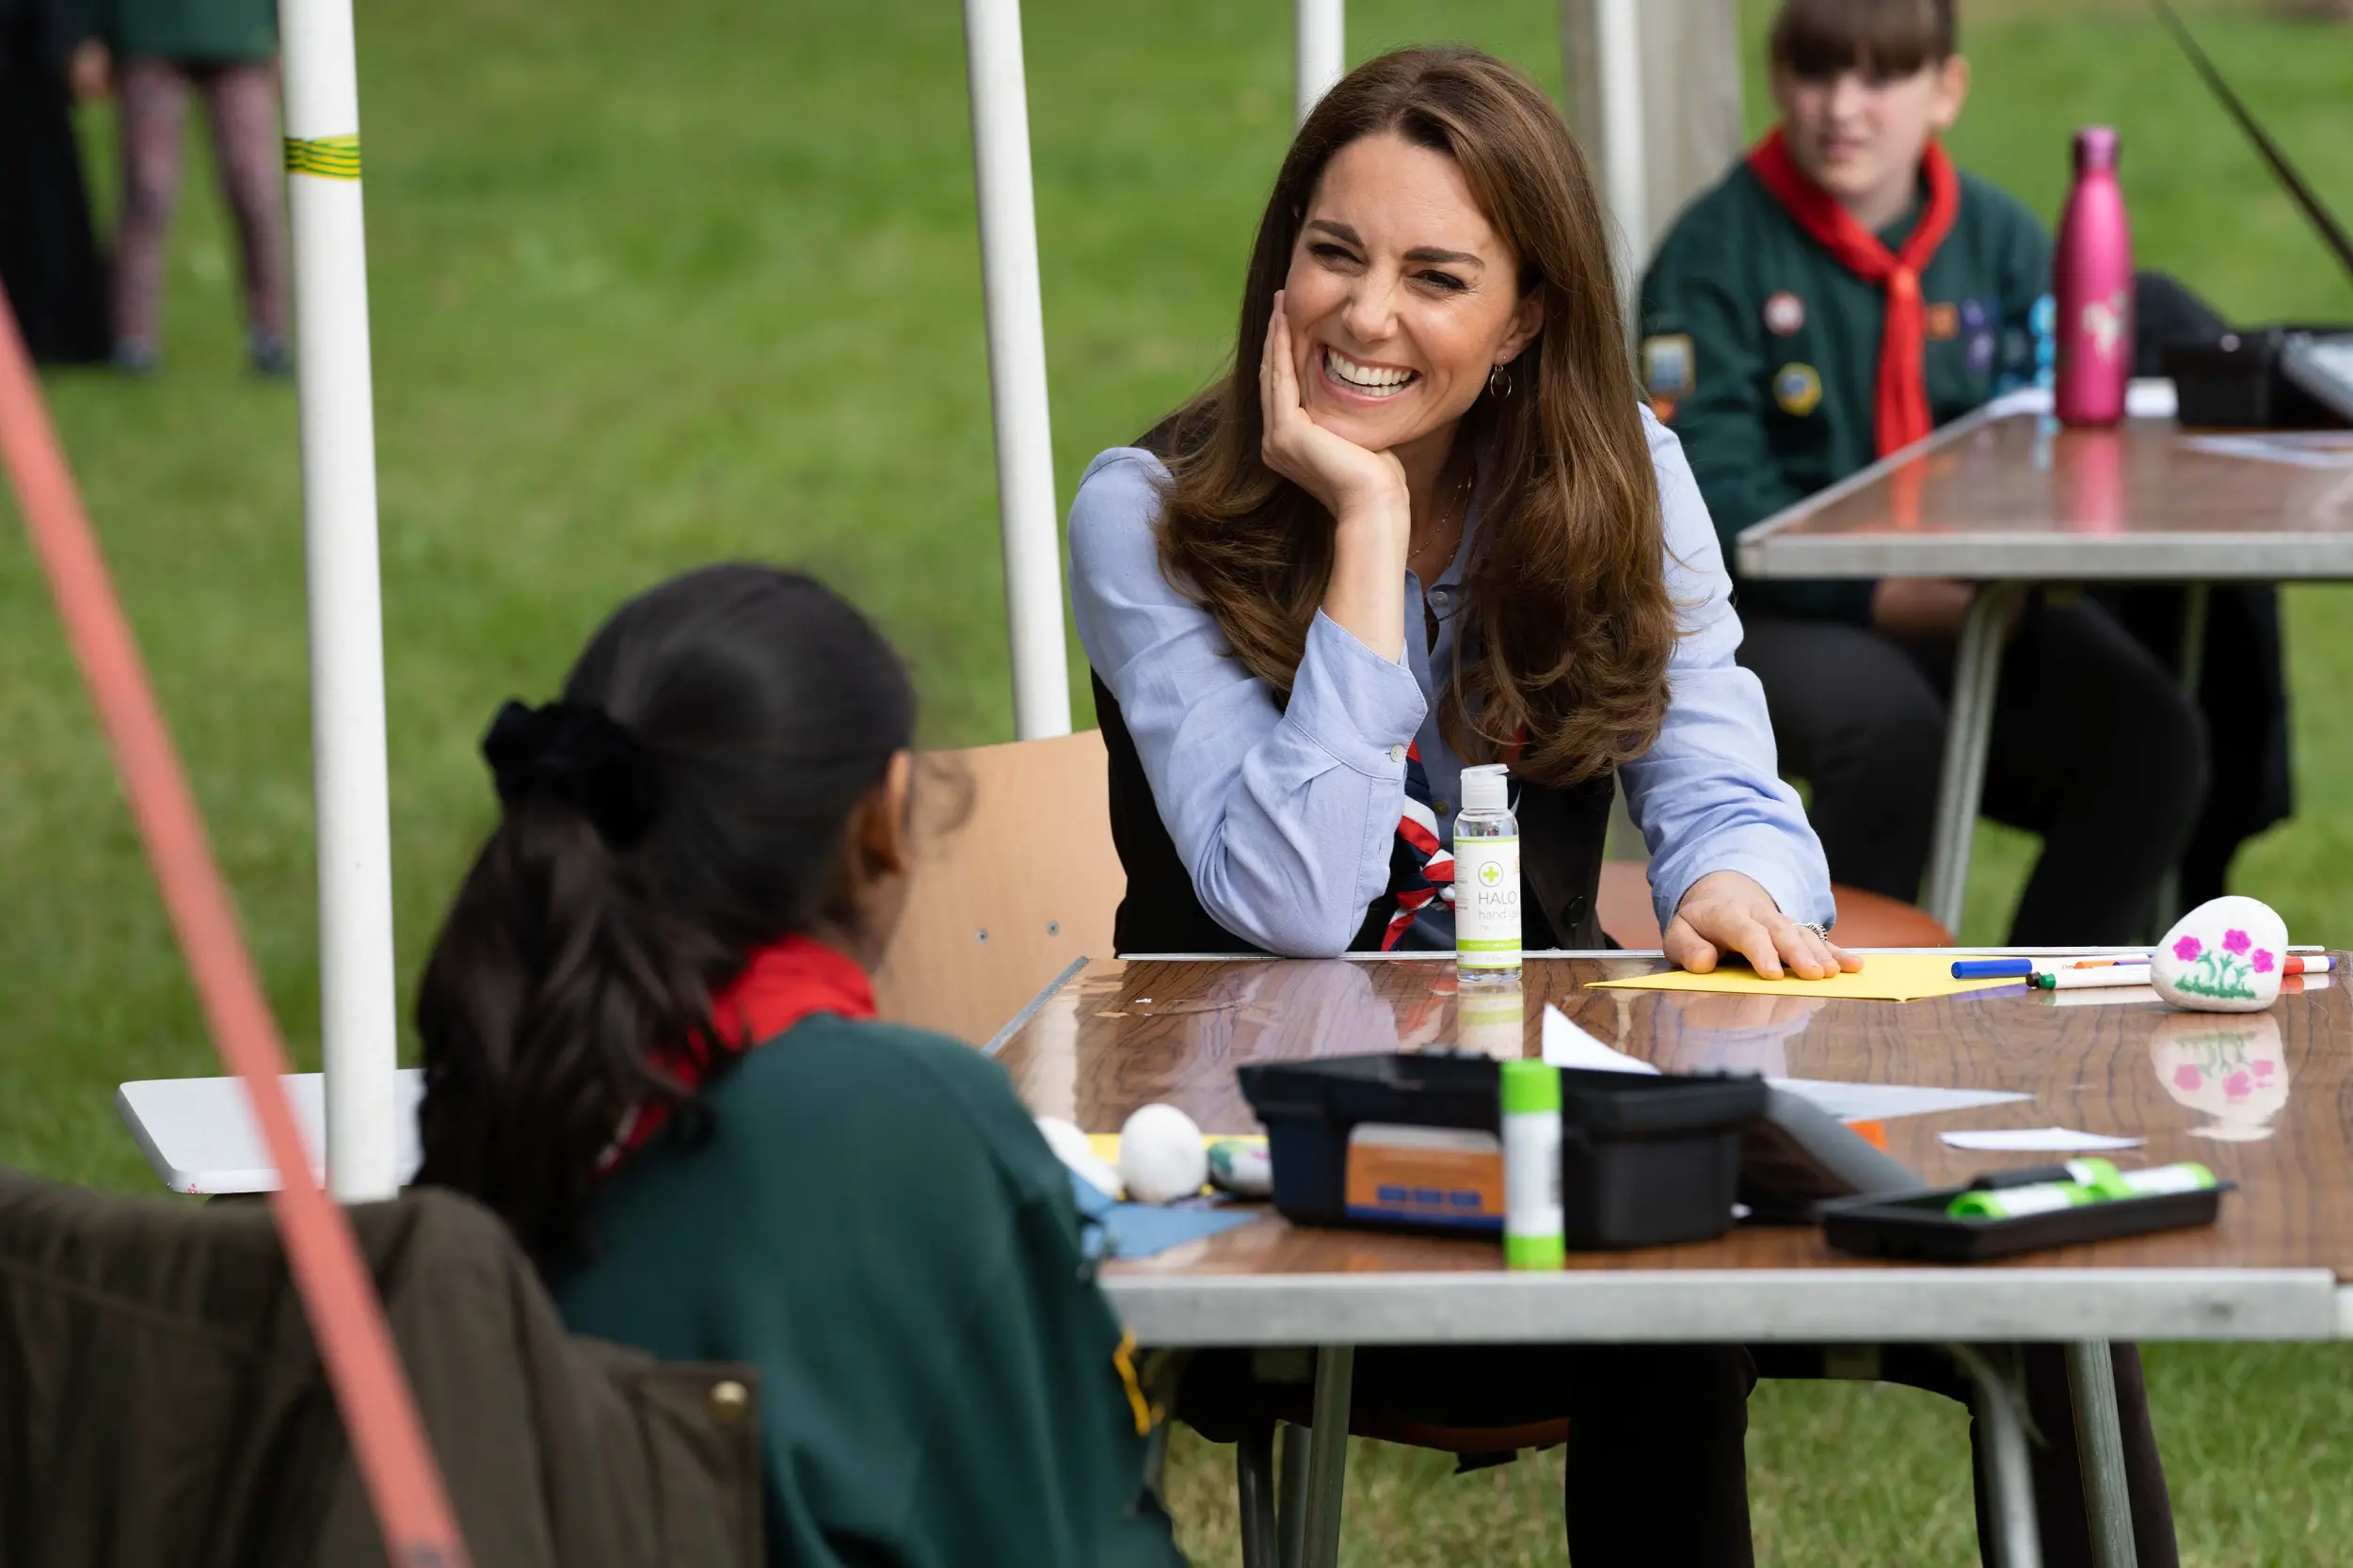 The Duchess of Cambridge became the Joint President of the Scouts Association